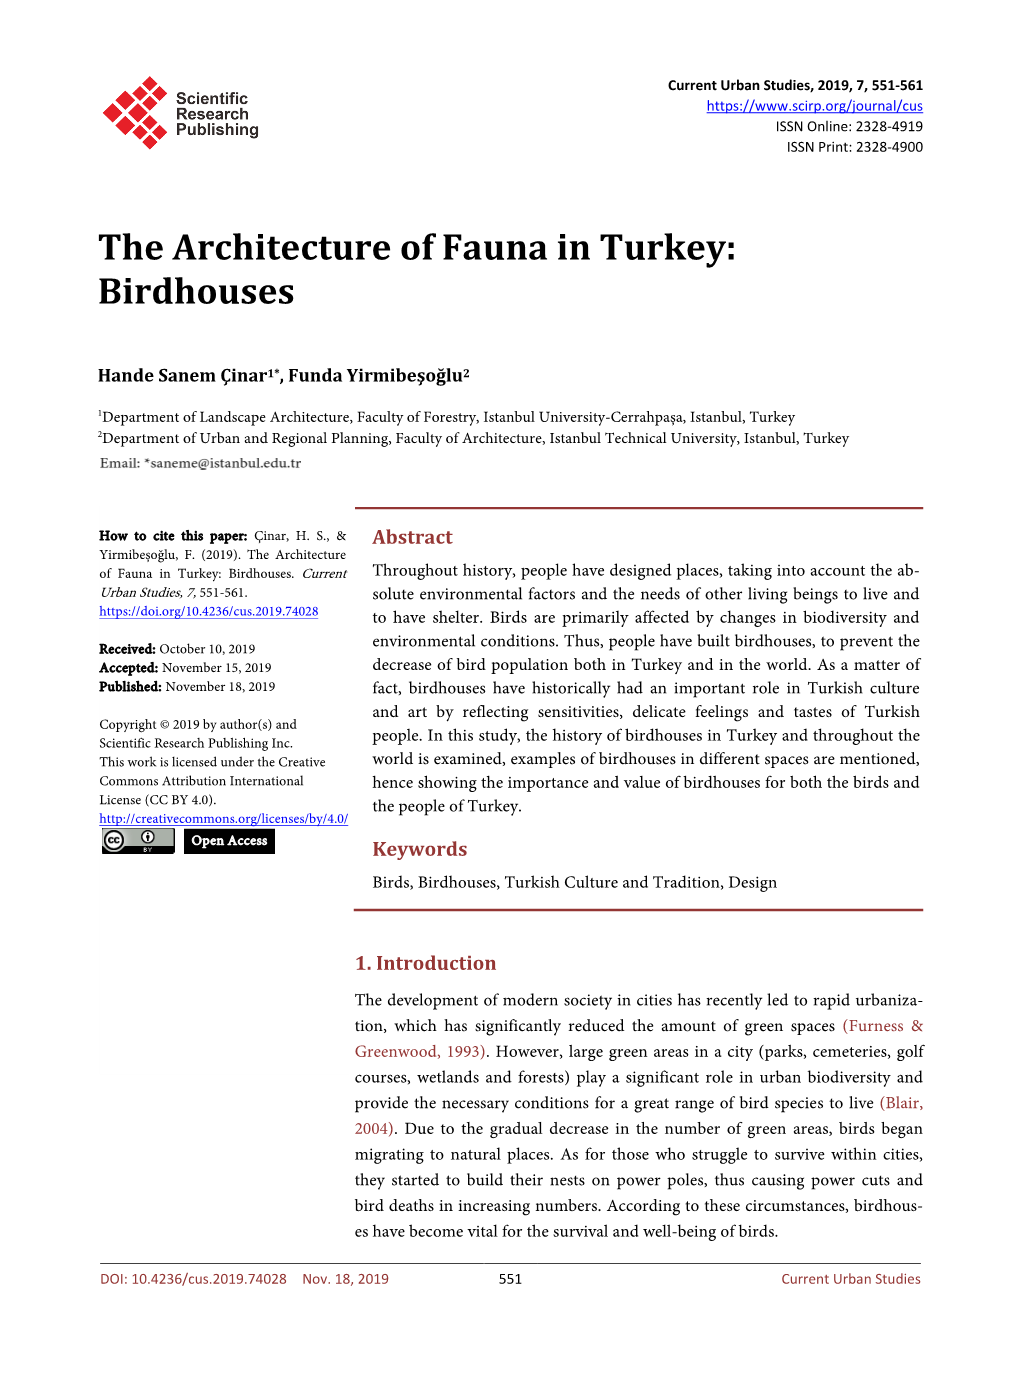 The Architecture of Fauna in Turkey: Birdhouses